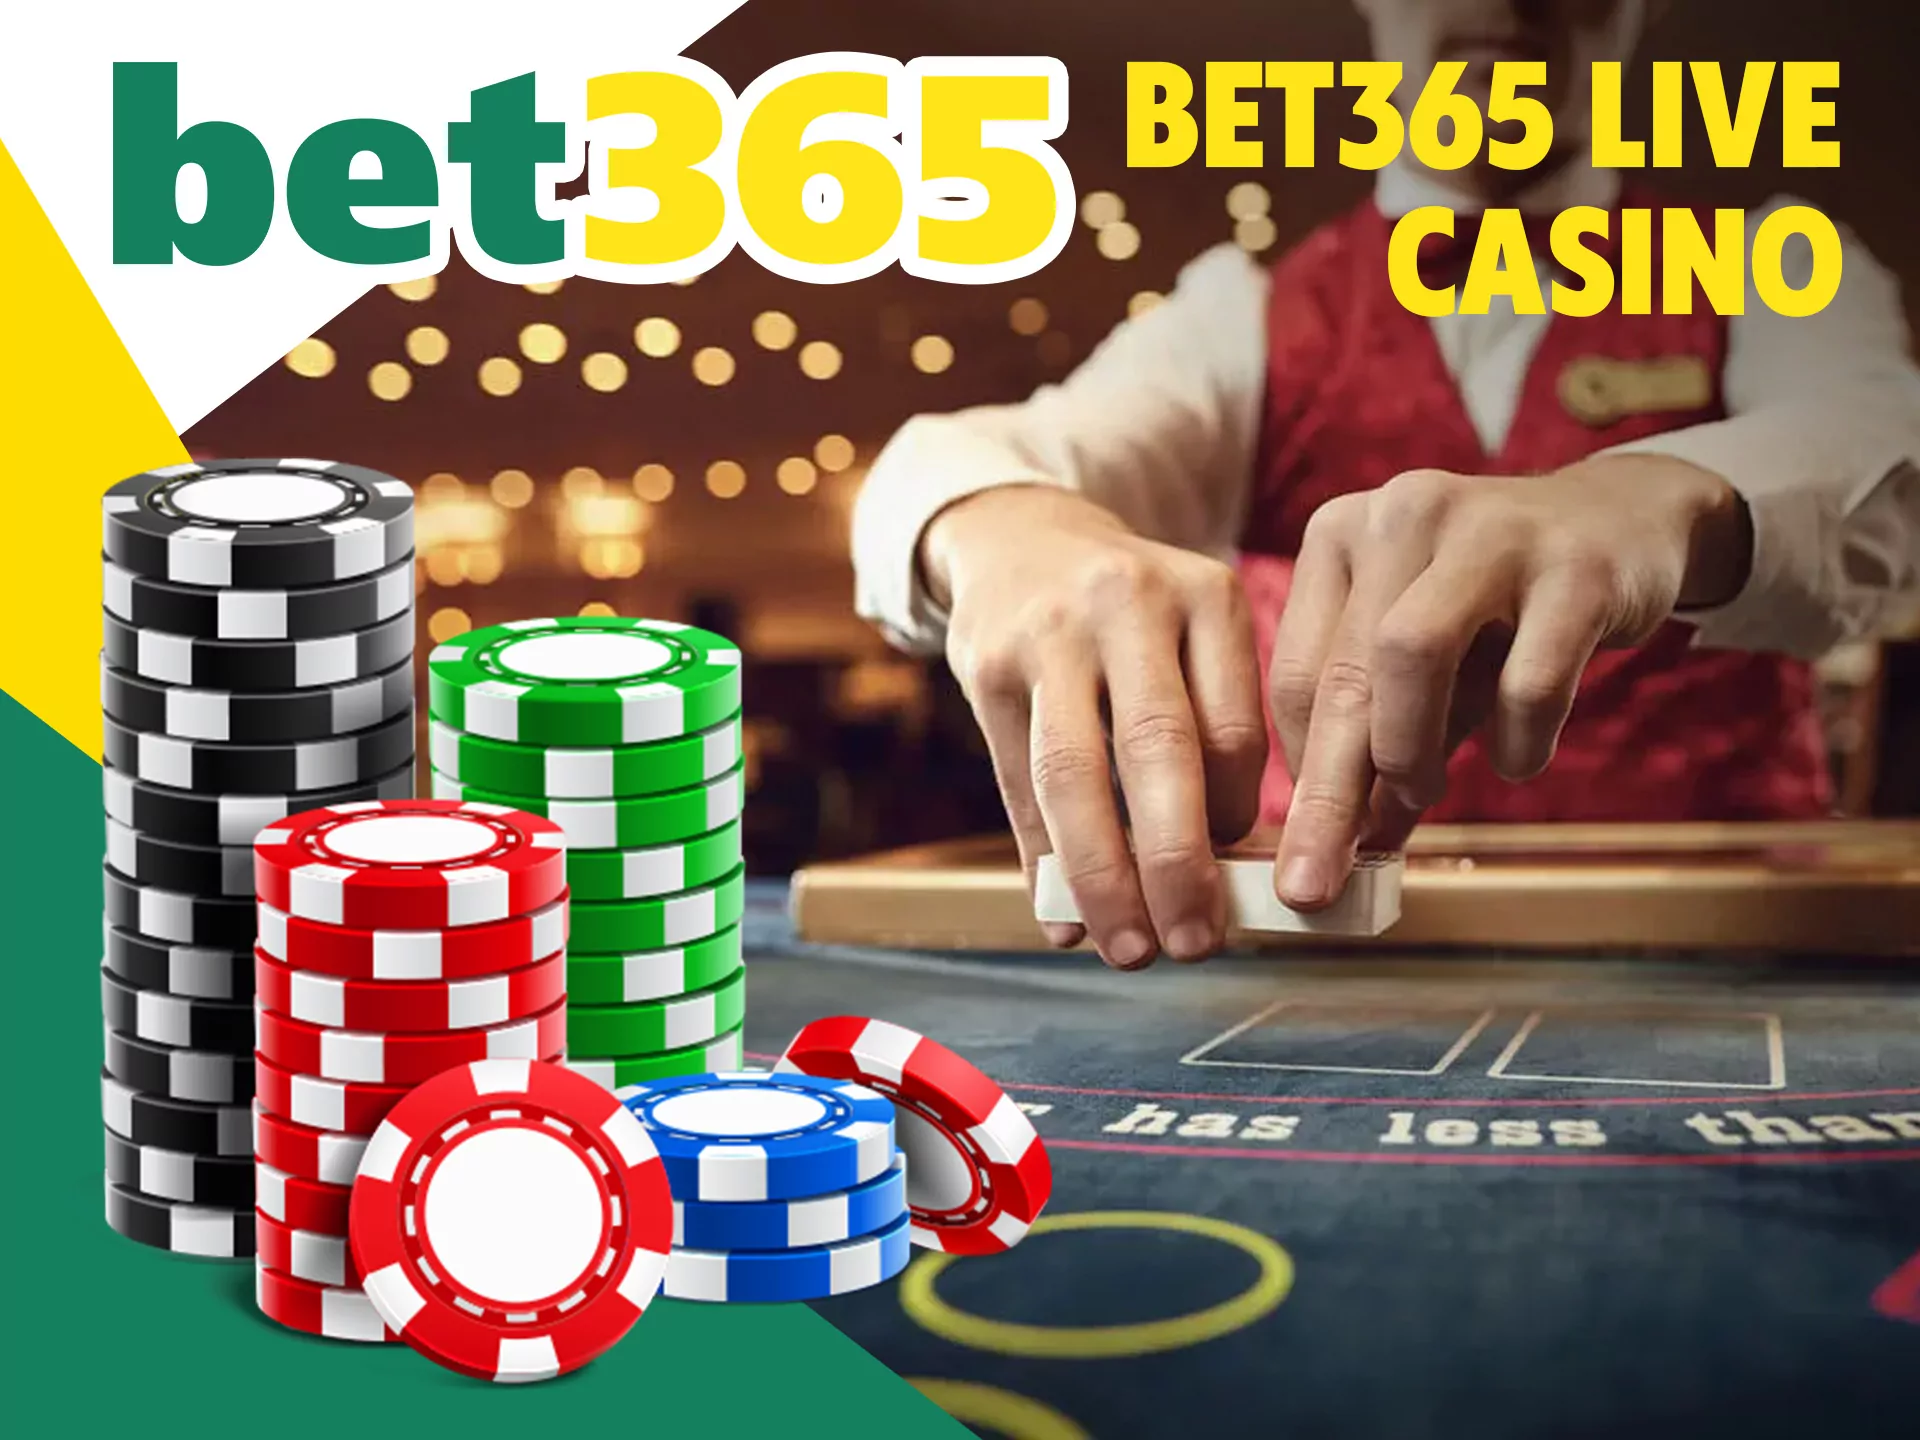 Play with real people at the same table at Bet365.